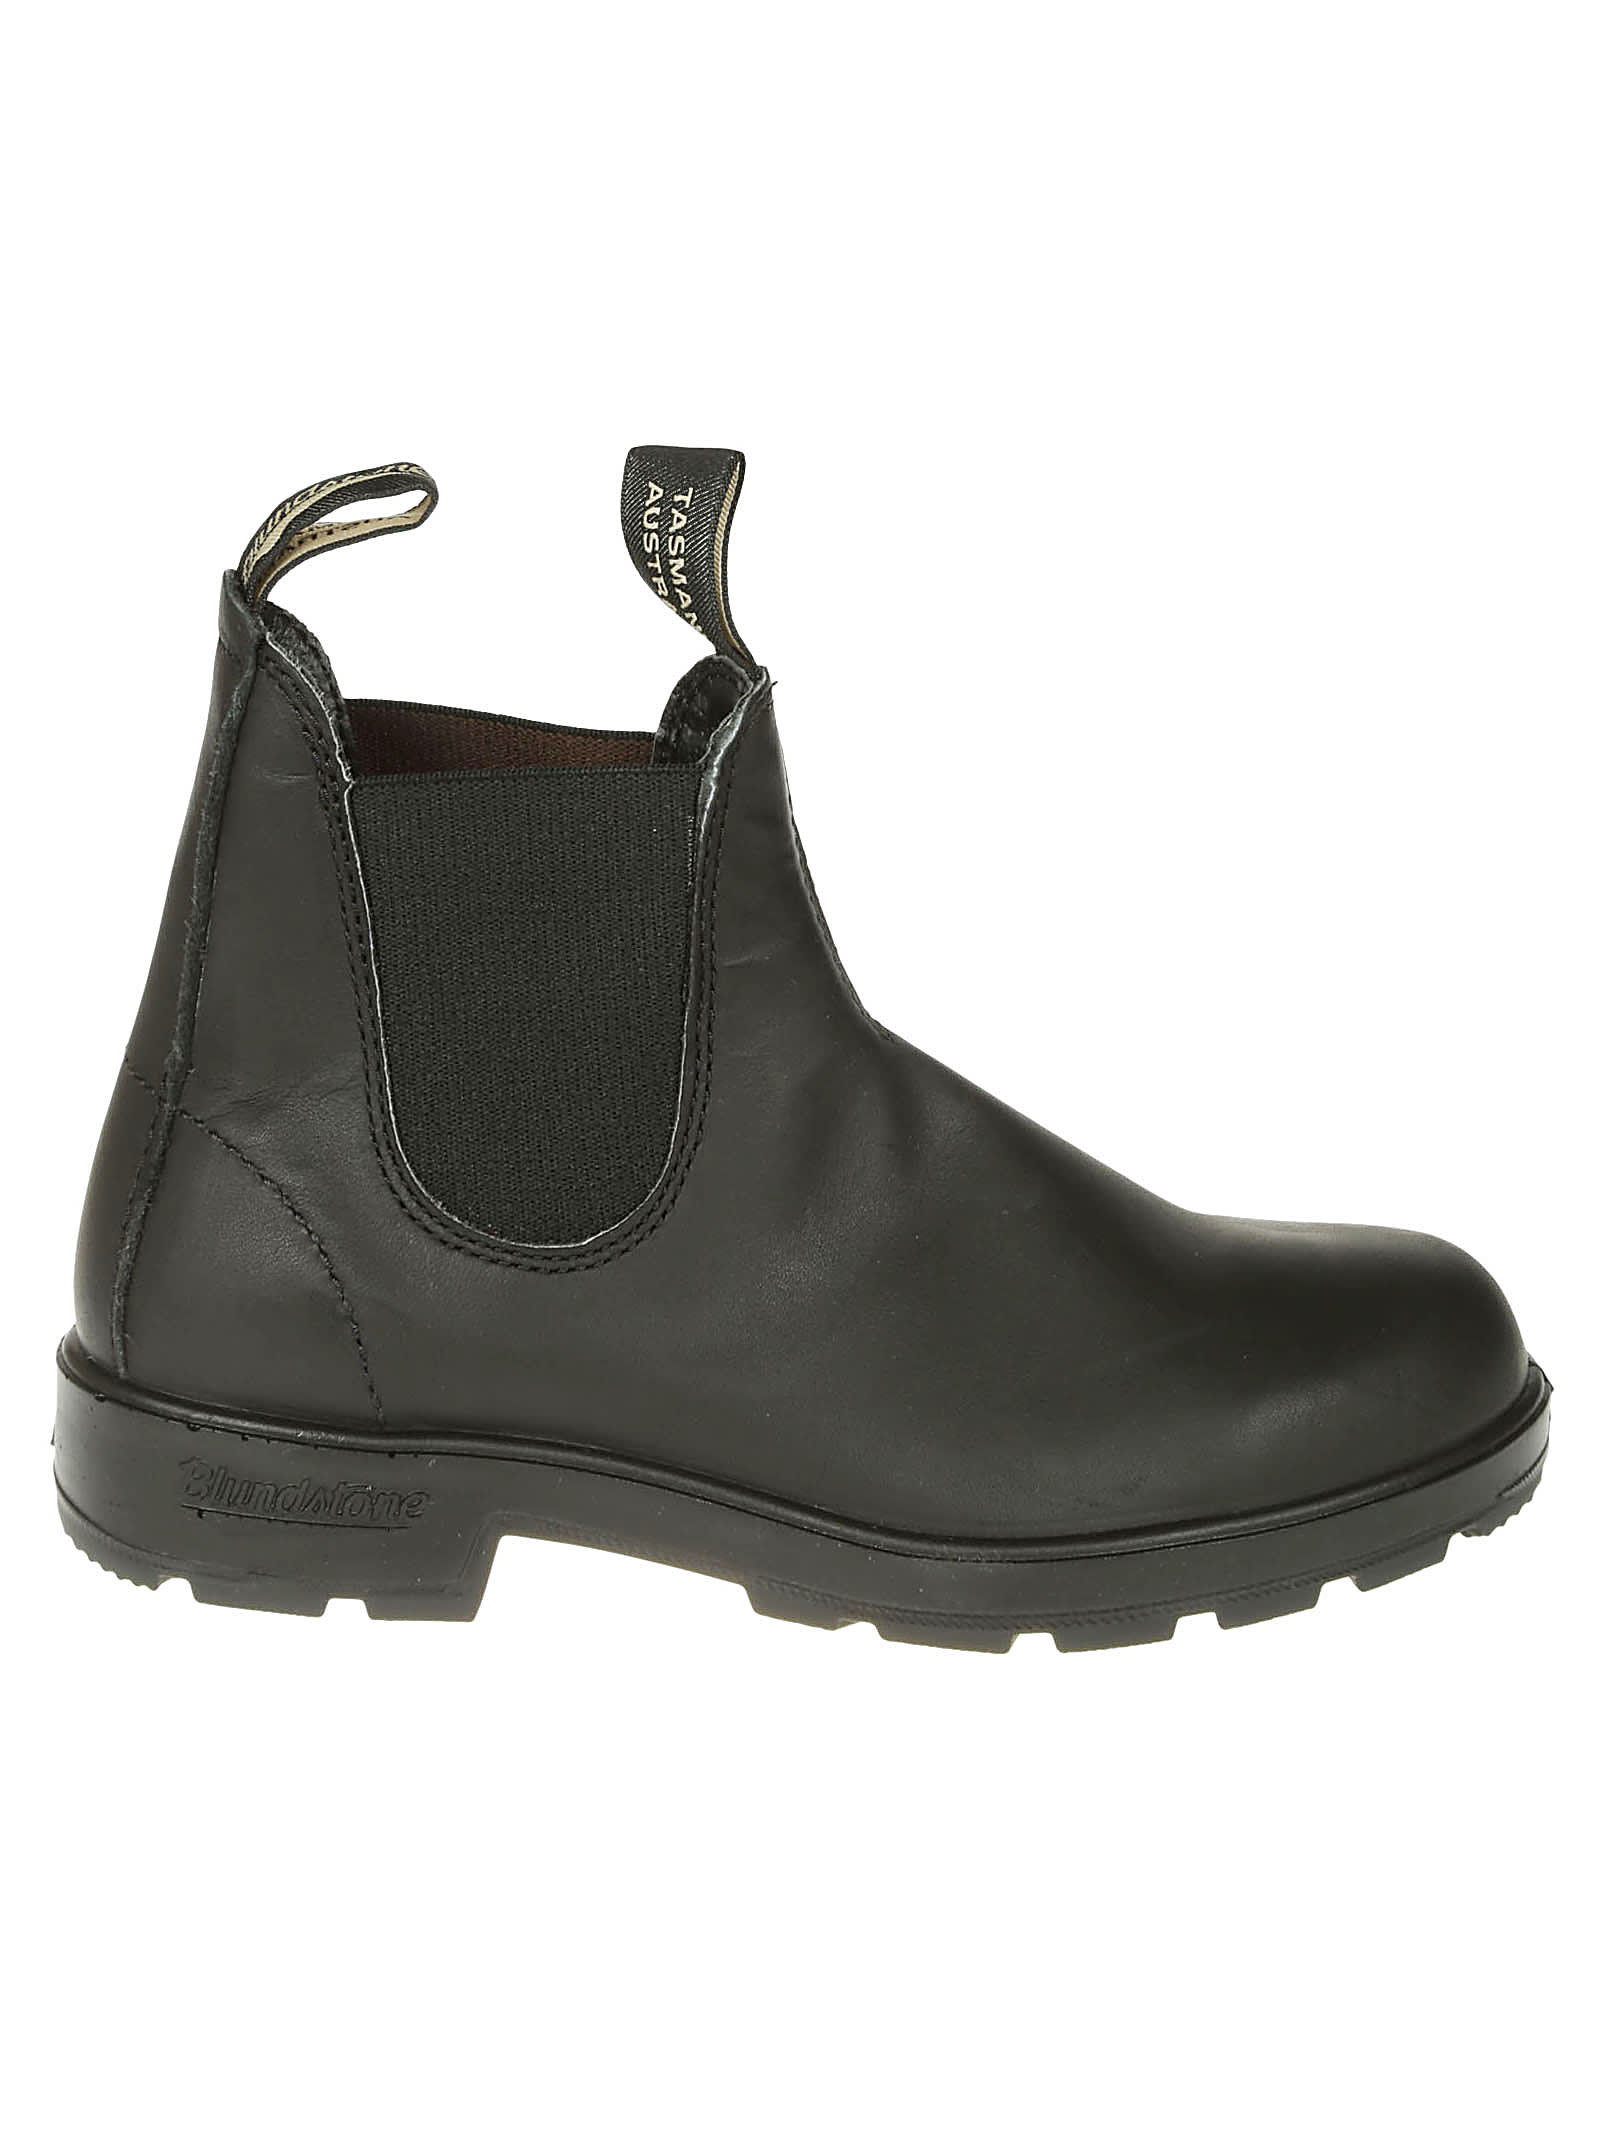 Blundstone Elastic Sided Boots